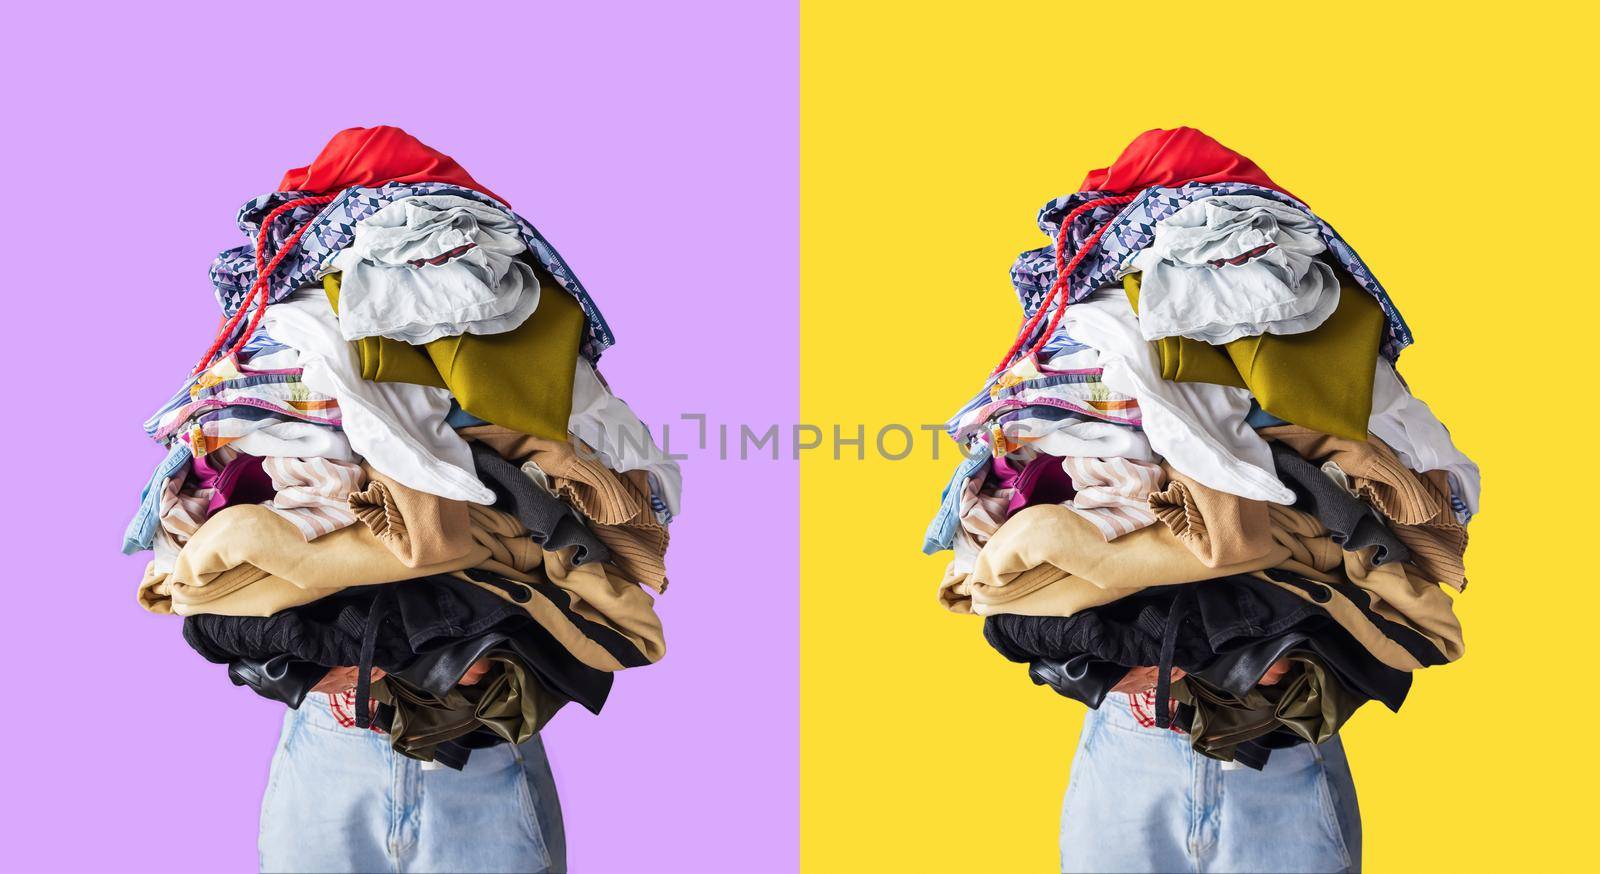 set of two photographs on yellow and purple background. close-up, a young woman holds in her hands a large pile of colored crumpled clothes. The girl's head is not visible, copy-paste for your design